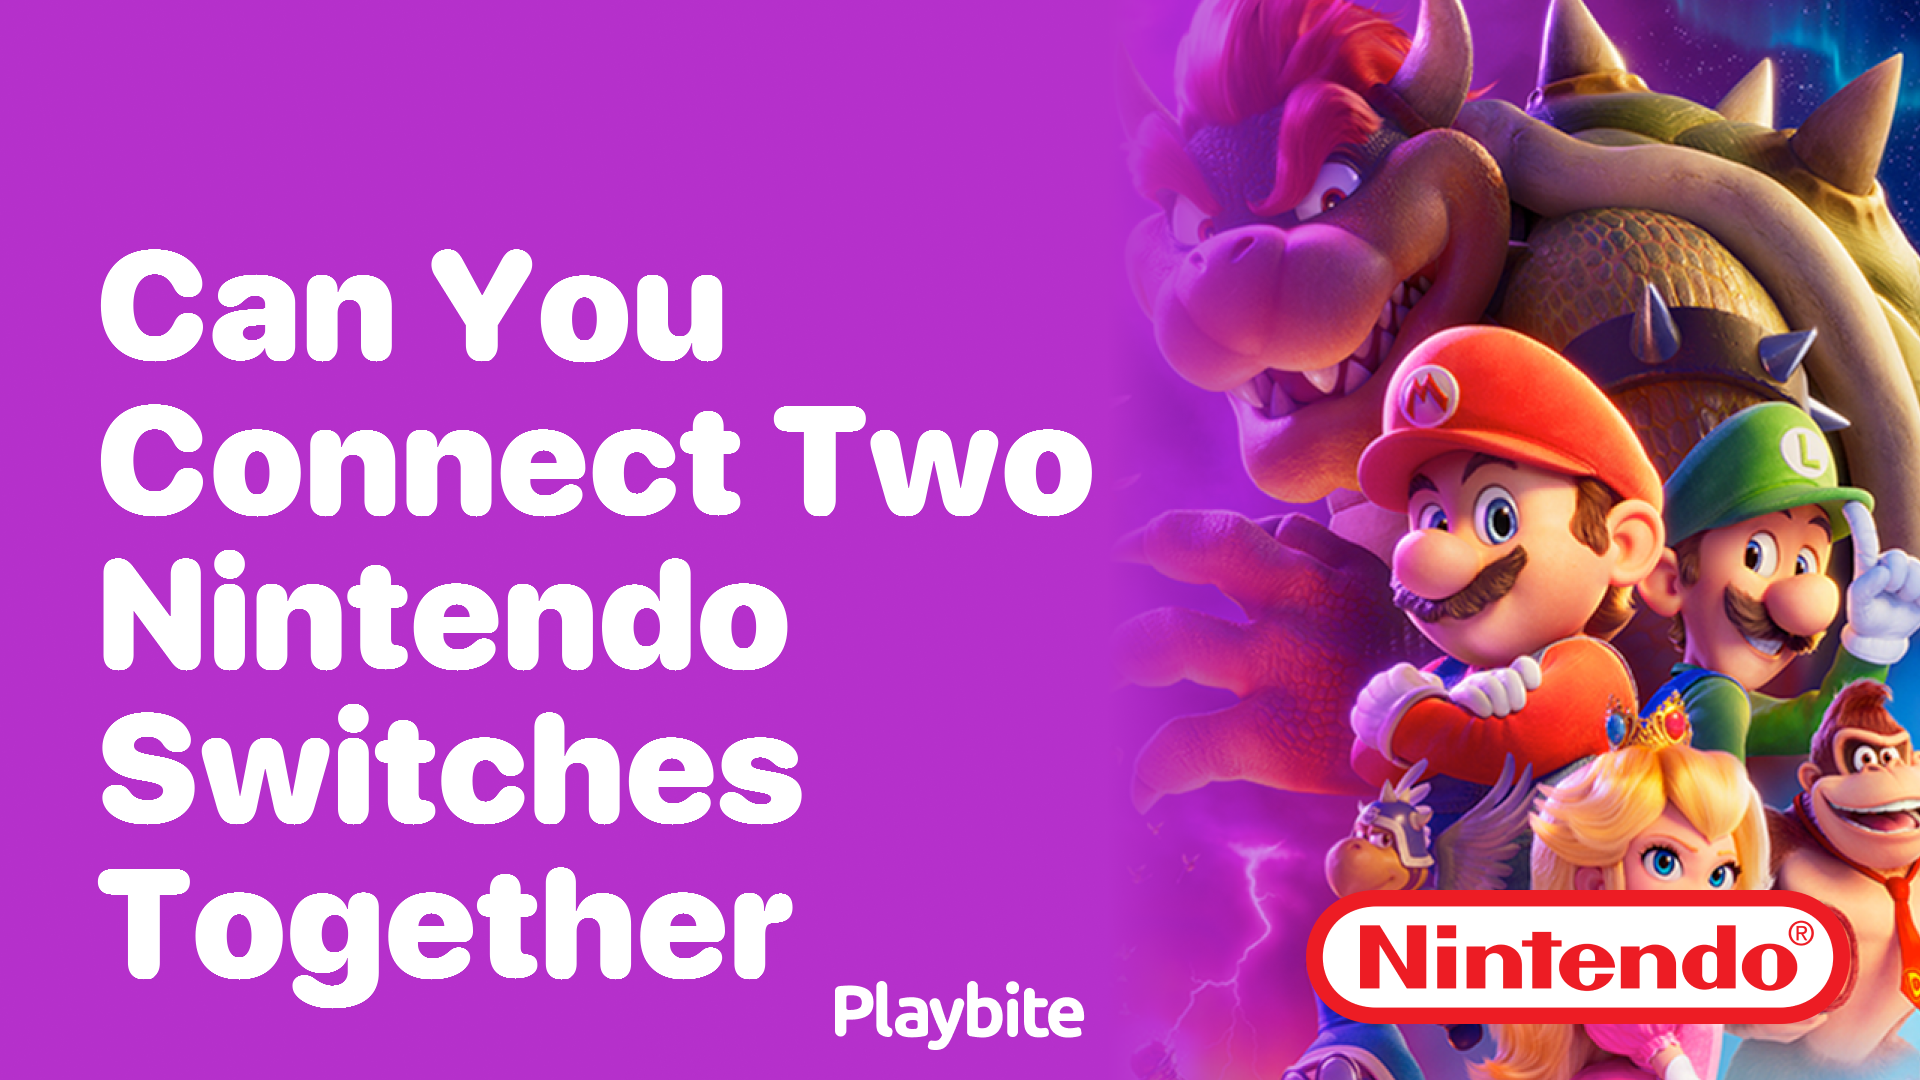 Can You Connect Two Nintendo Switches Together for Multiplayer Fun?